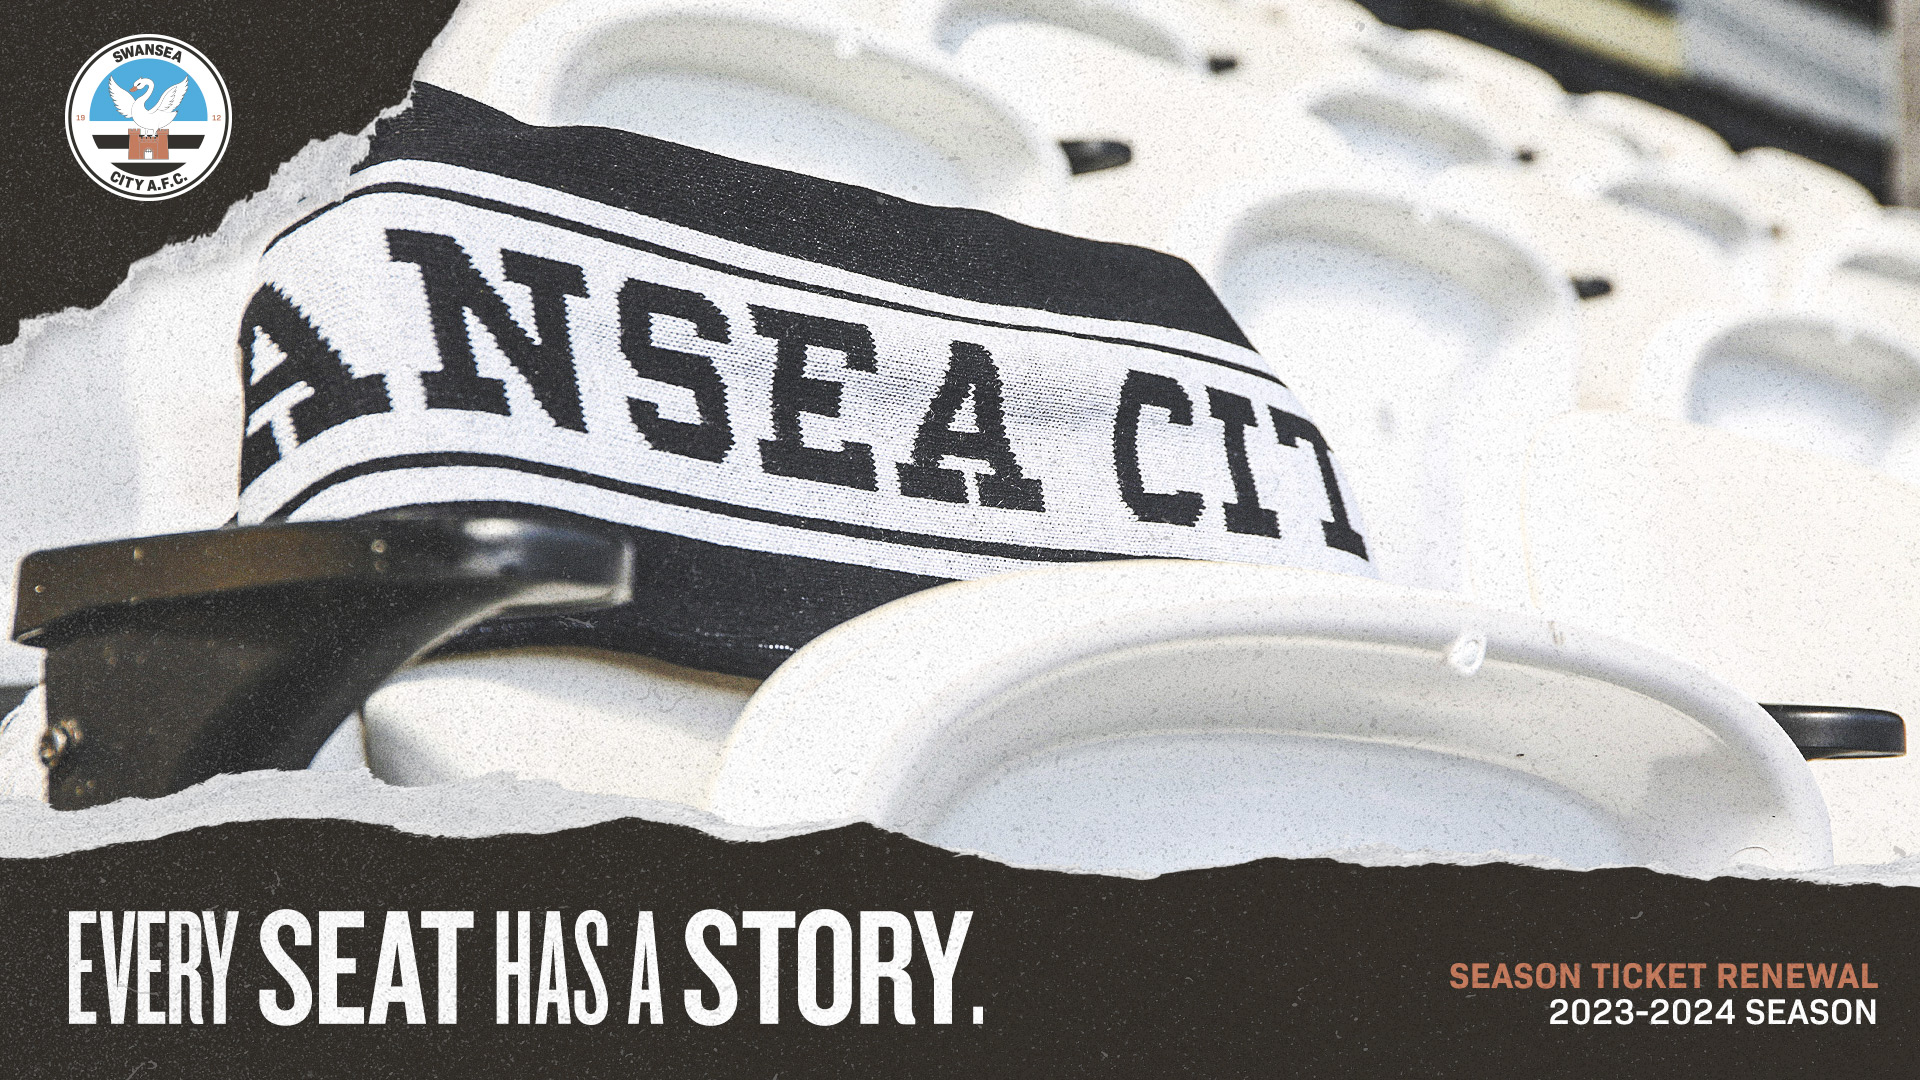 Every seat has a story. Two weeks remaining to renew your Swansea City season ticket. Swansea City scarf draped over white chair at Swansea.com Stadium.